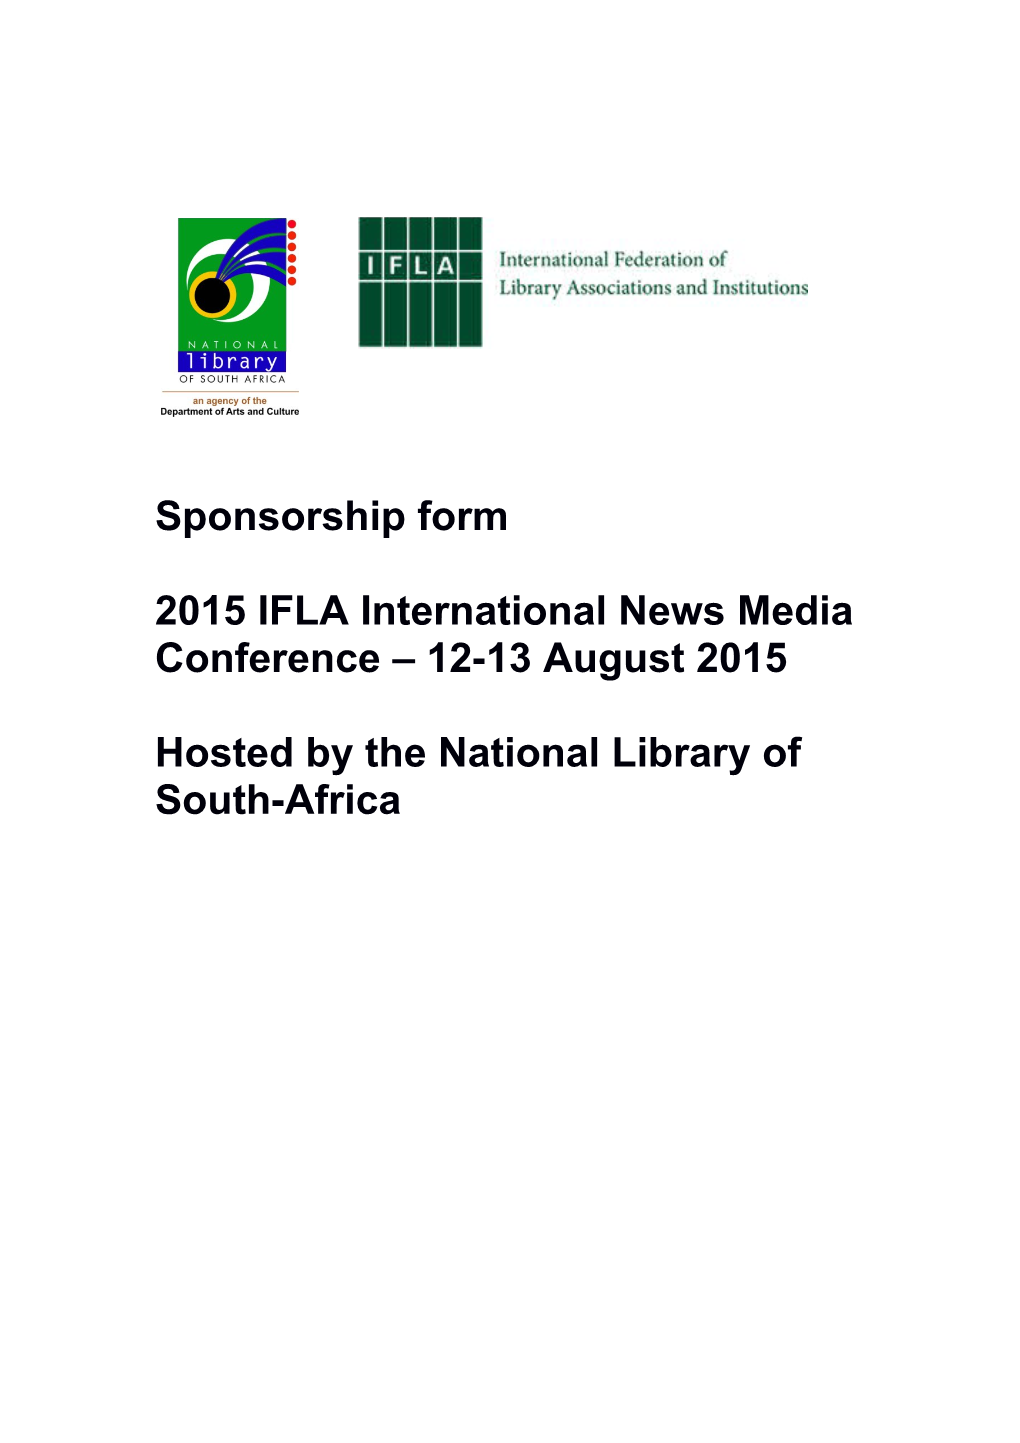 Hosted by the National Library of South-Africa